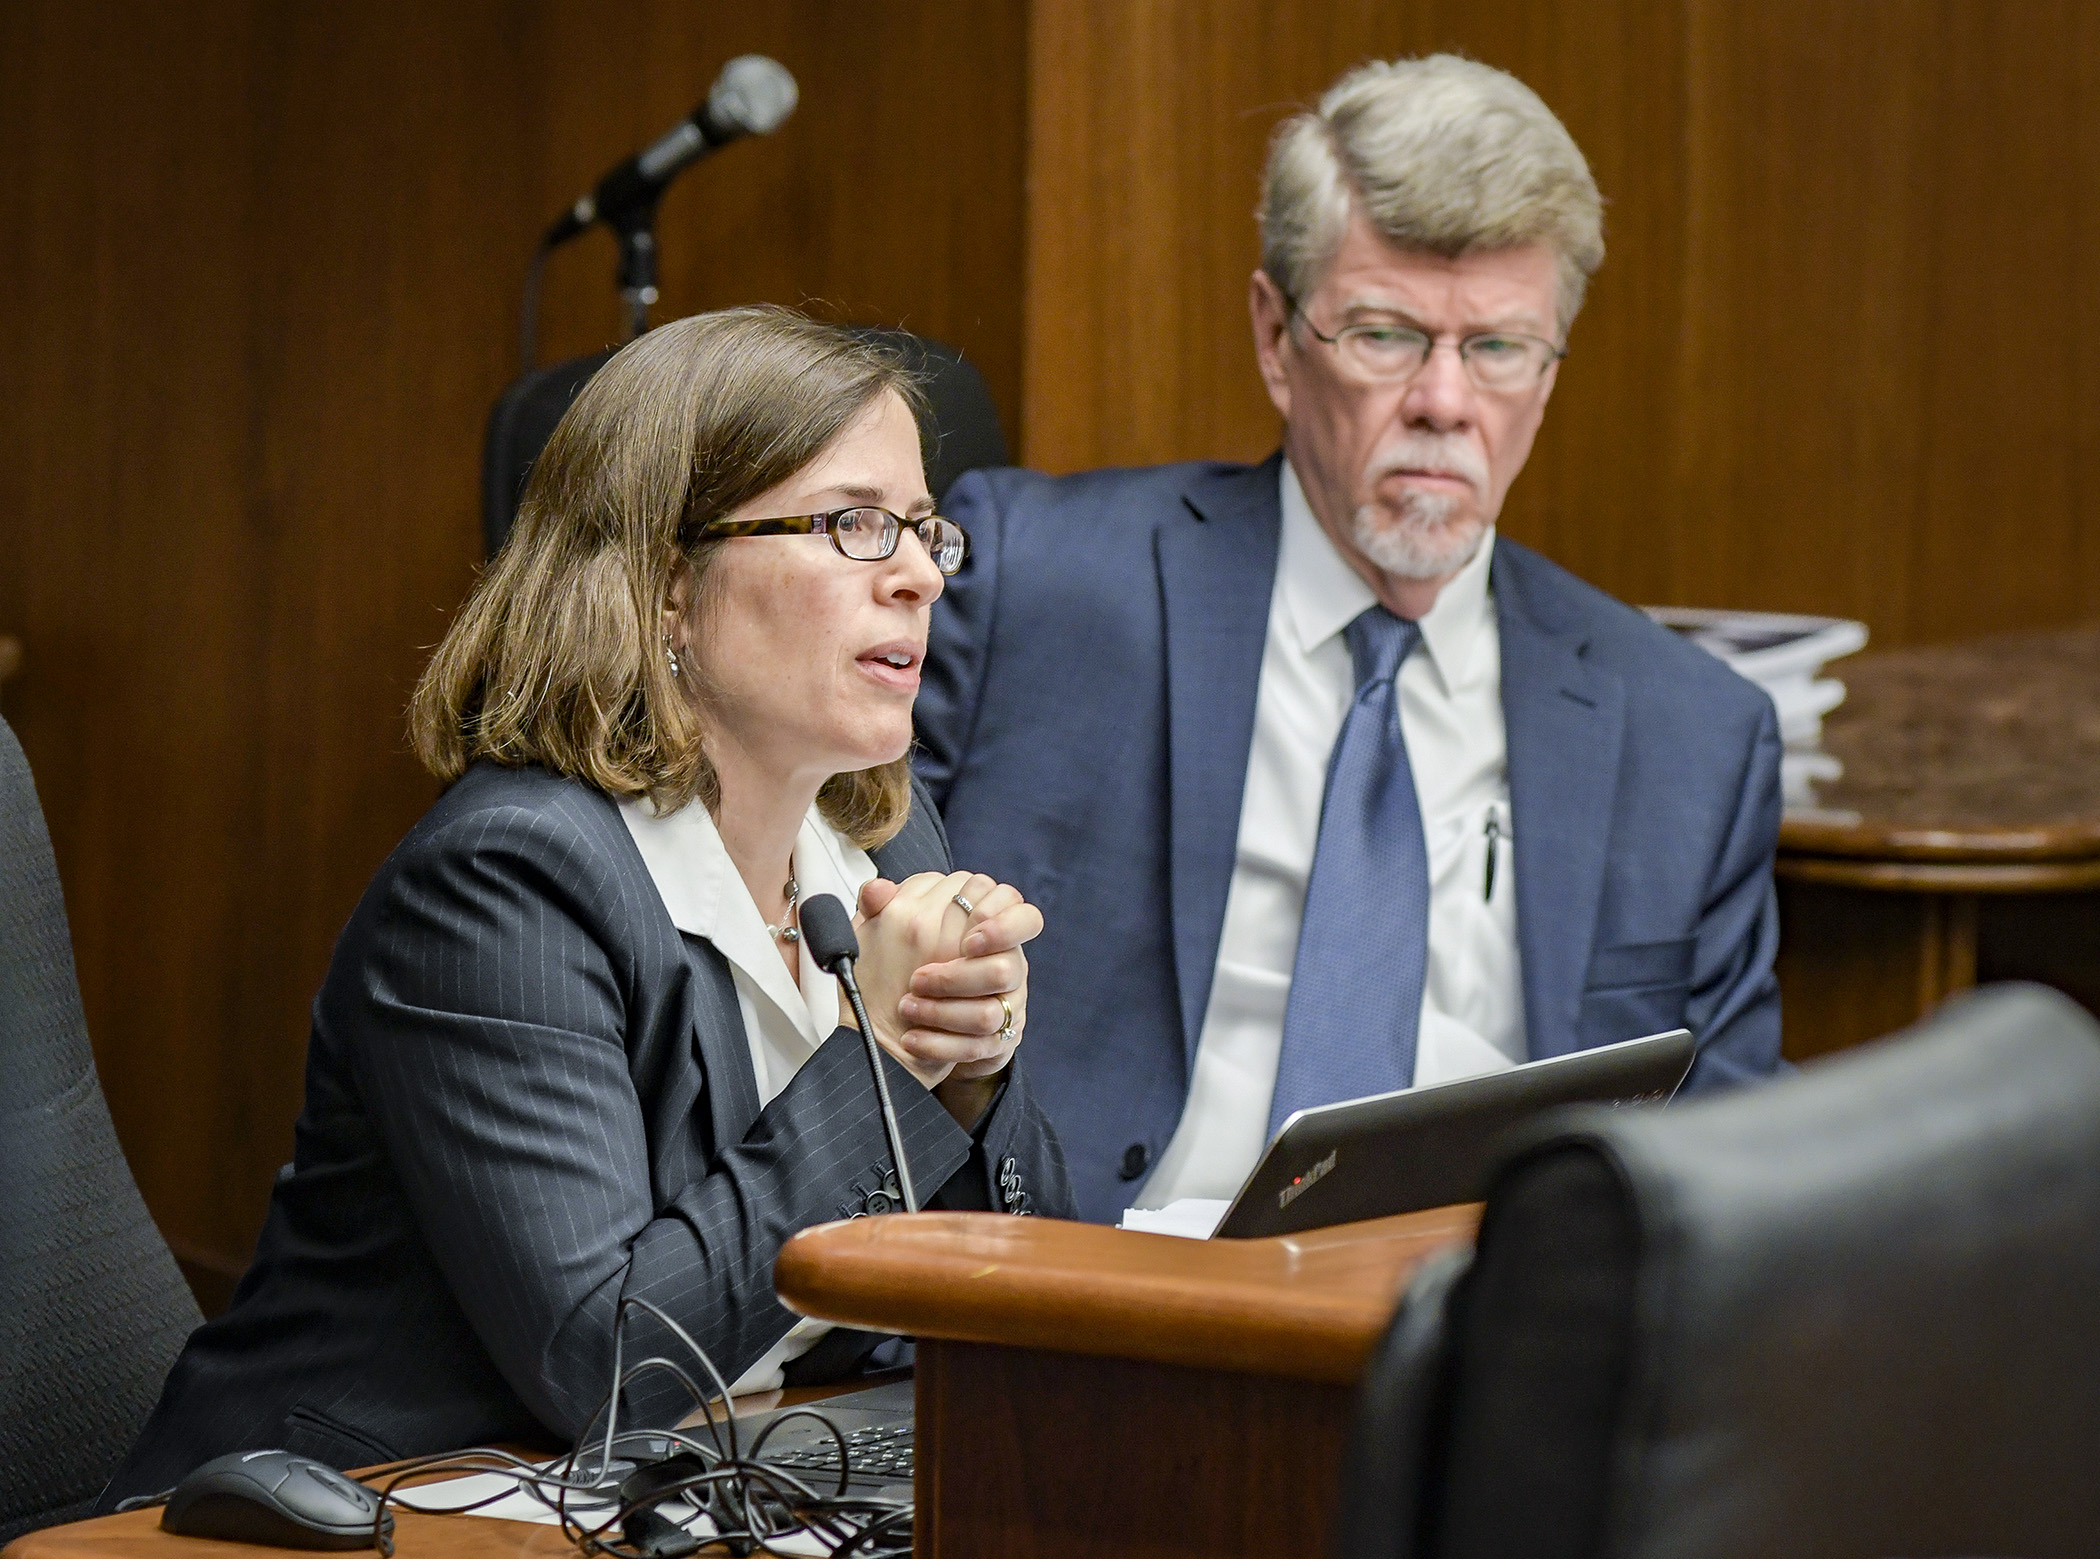 Legislative Auditor Jim Nobles and Deputy Auditor Judy Randall testify before a joint House Subcommittee on Aging and Long-Term Care and House Health and Human Services Reform Committee hearing March 6. Photo by Andrew VonBank